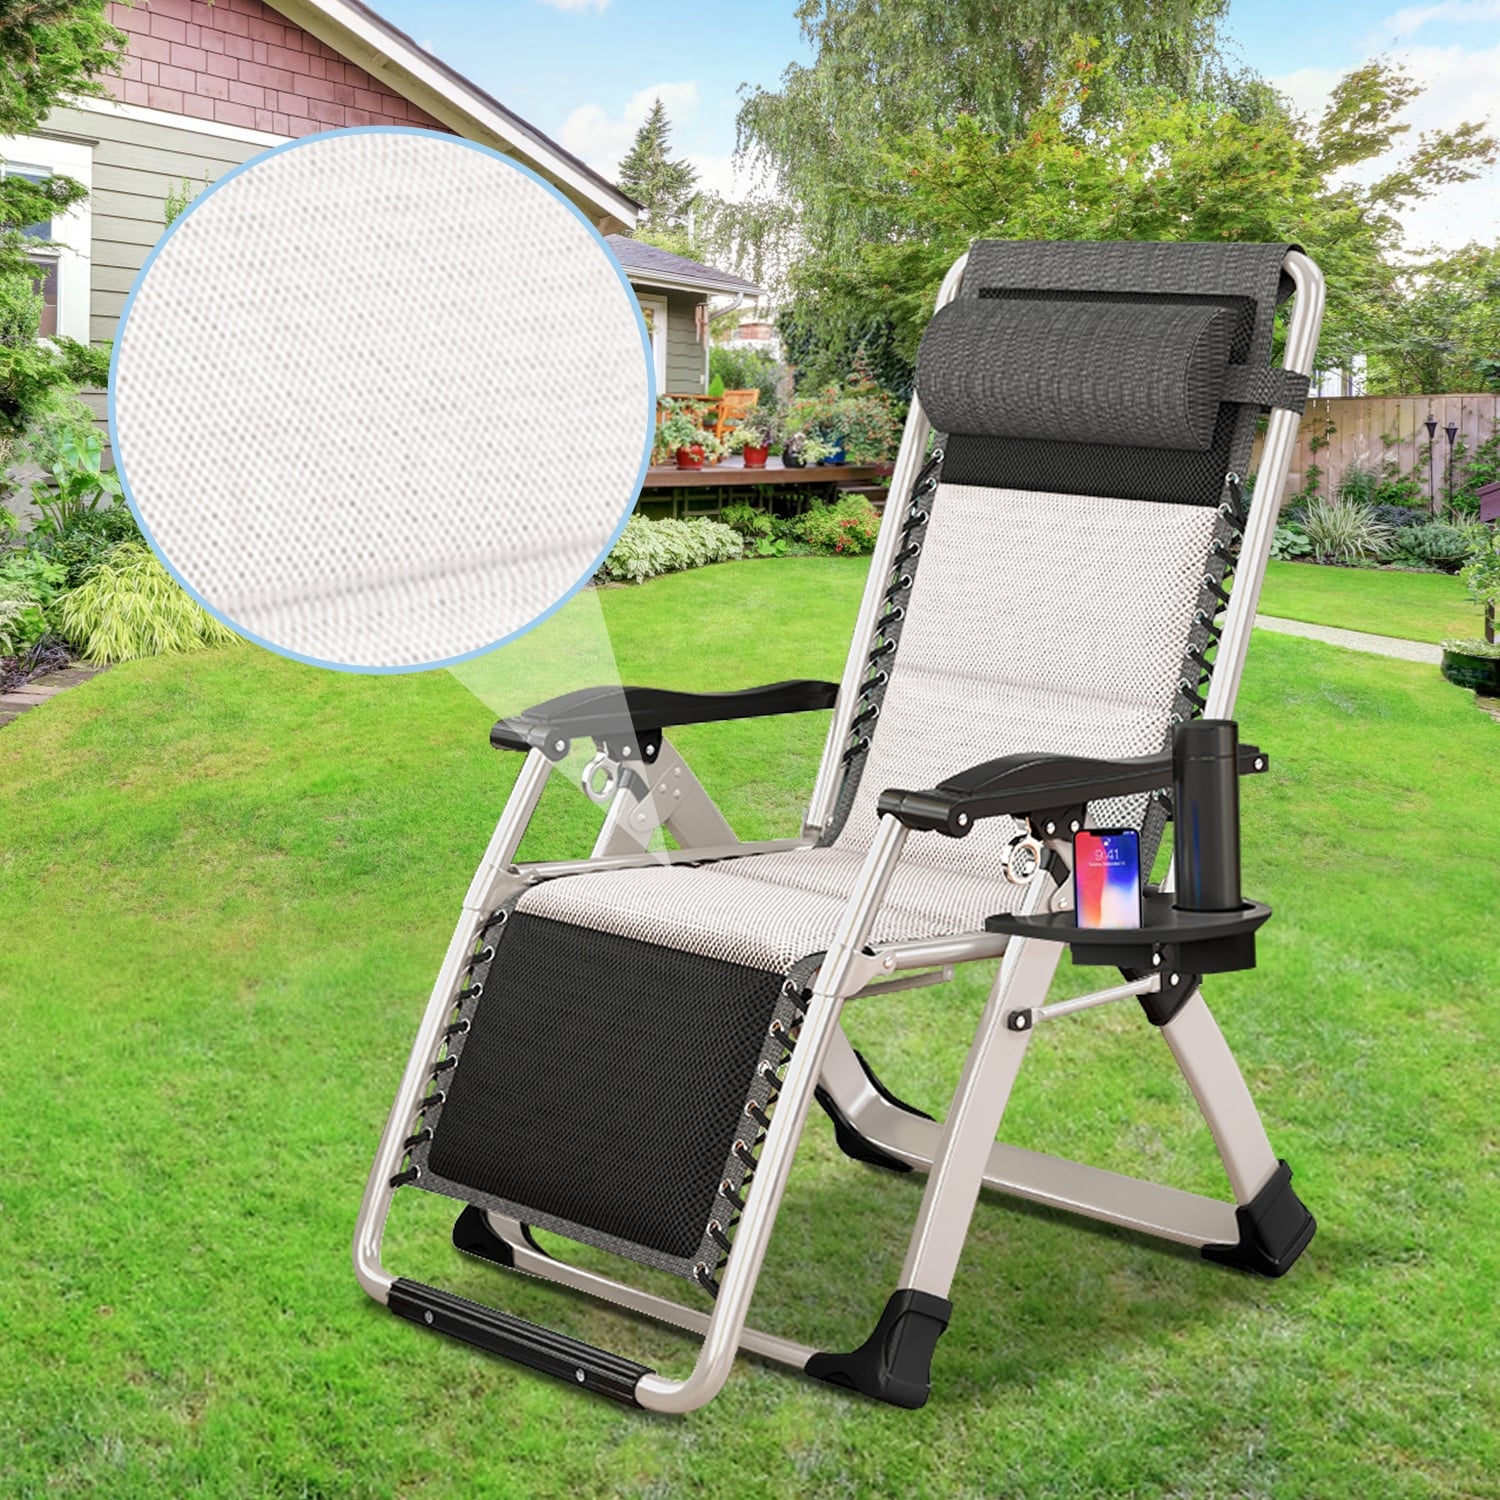 https://ak1.ostkcdn.com/images/products/is/images/direct/e0c0f6b72d64f7f9b34ff9ba06f5a4d3f8823b0c/DoCred-Zero-Gravity-Chair%2C-Portable-Lawn-Recliner%2C-Non-removable-pad.jpg